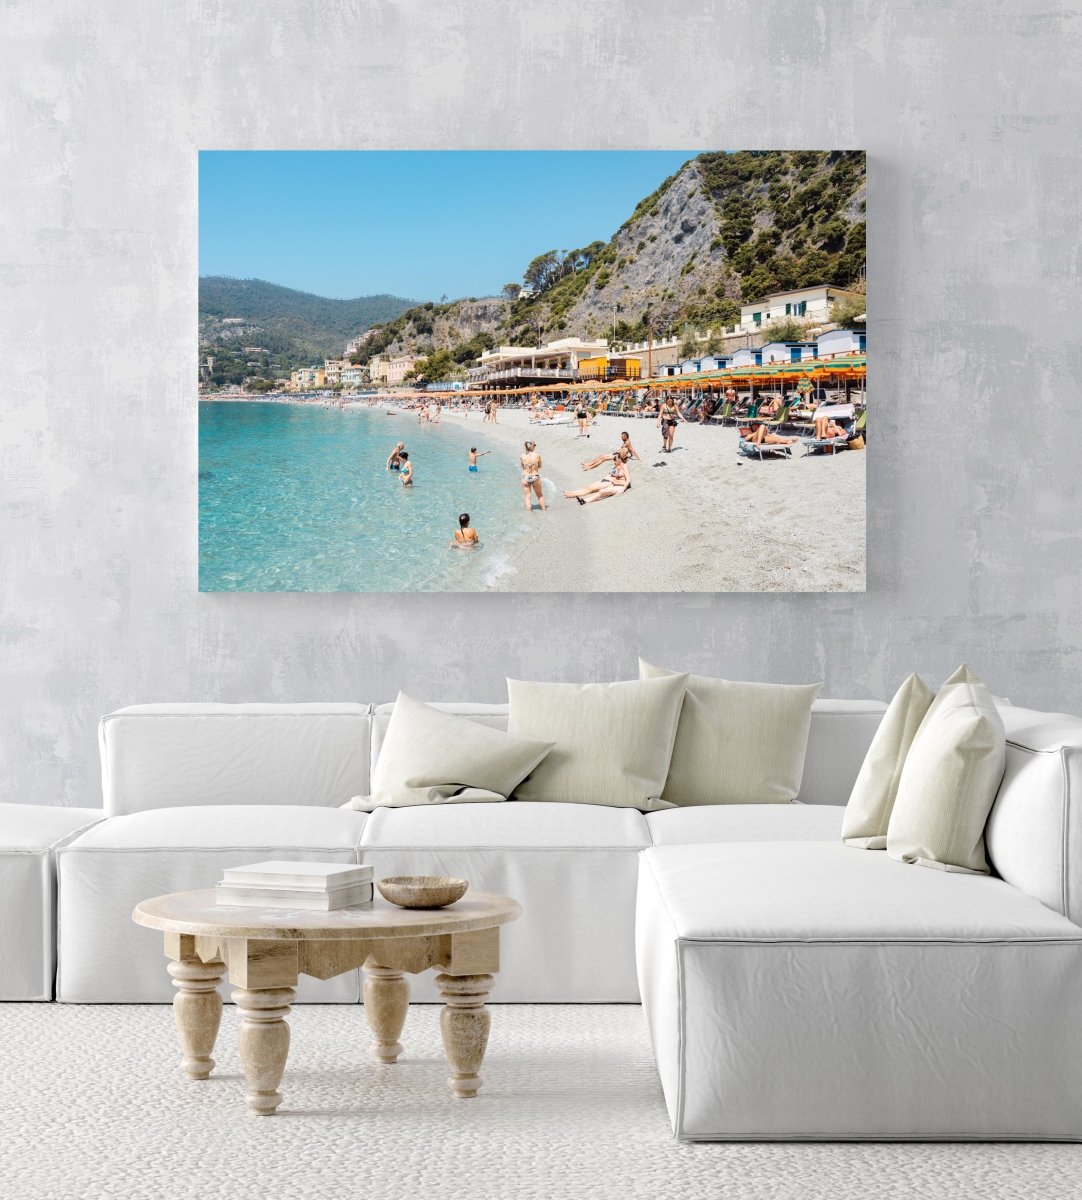 People swimming and sitting at colorful Monterosso beach in Cinque Terre in an acrylic/perspex frame